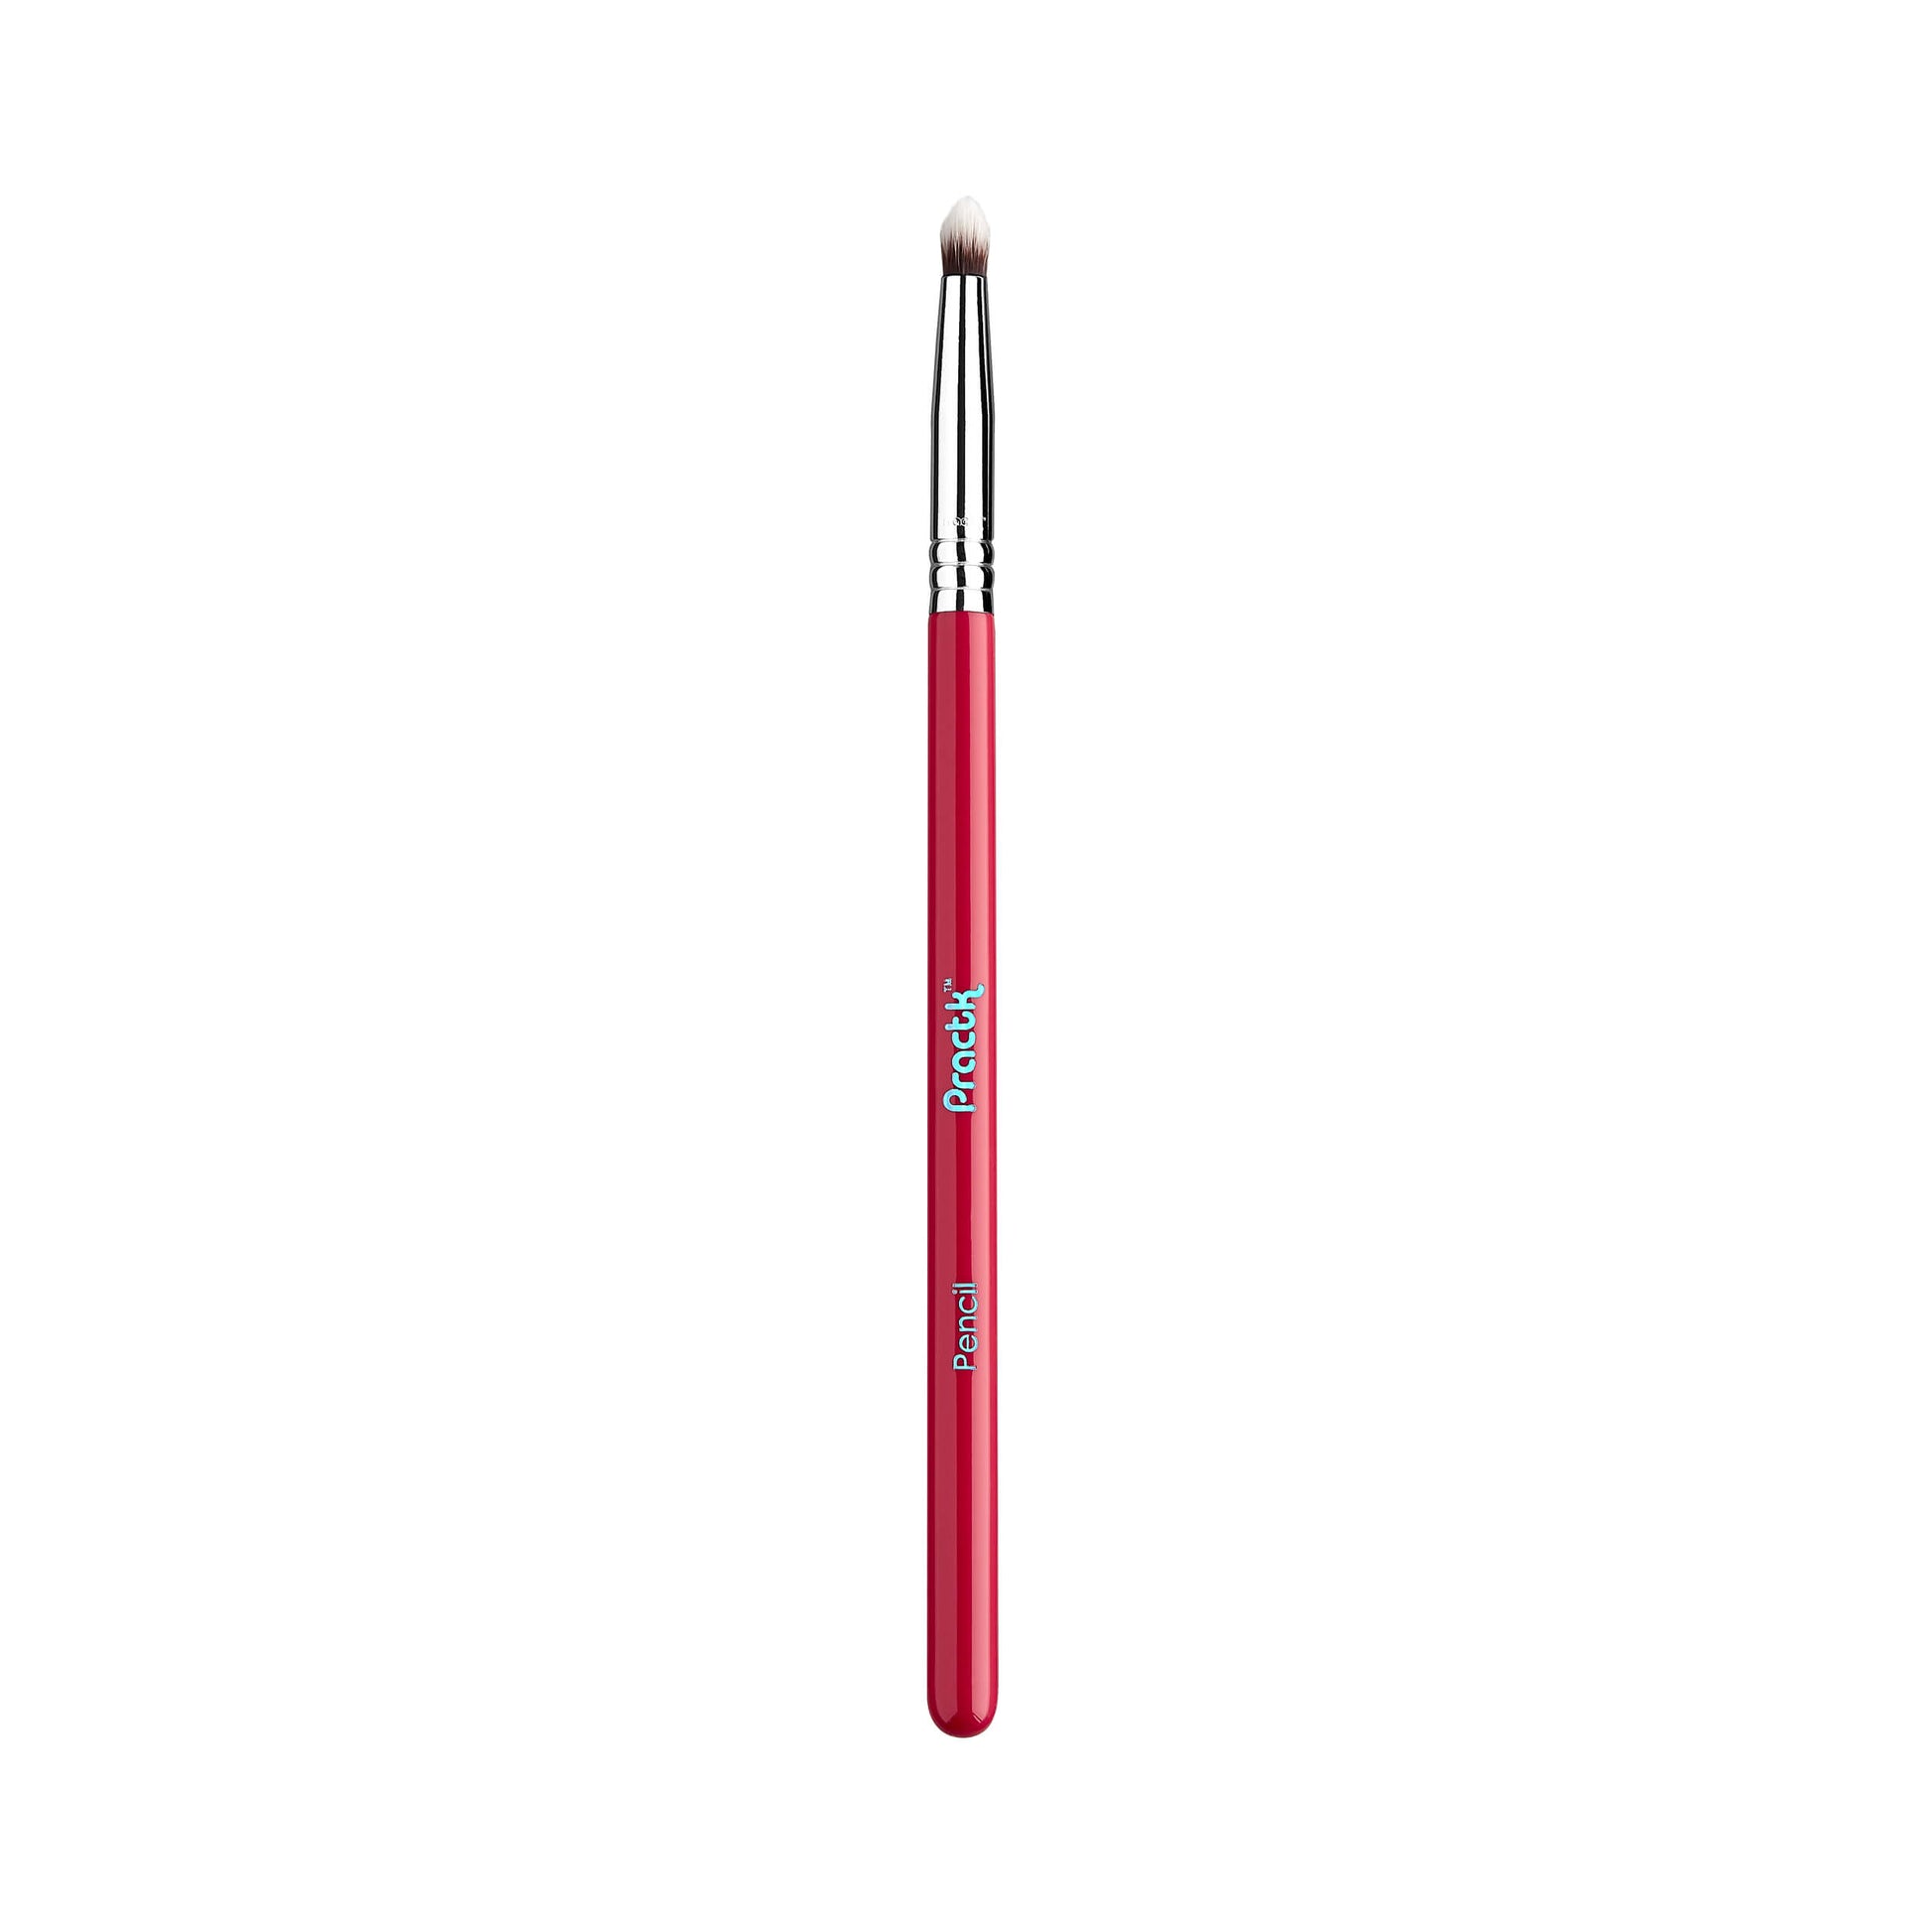 Practk (by Sigma Beauty) Pencil Brush